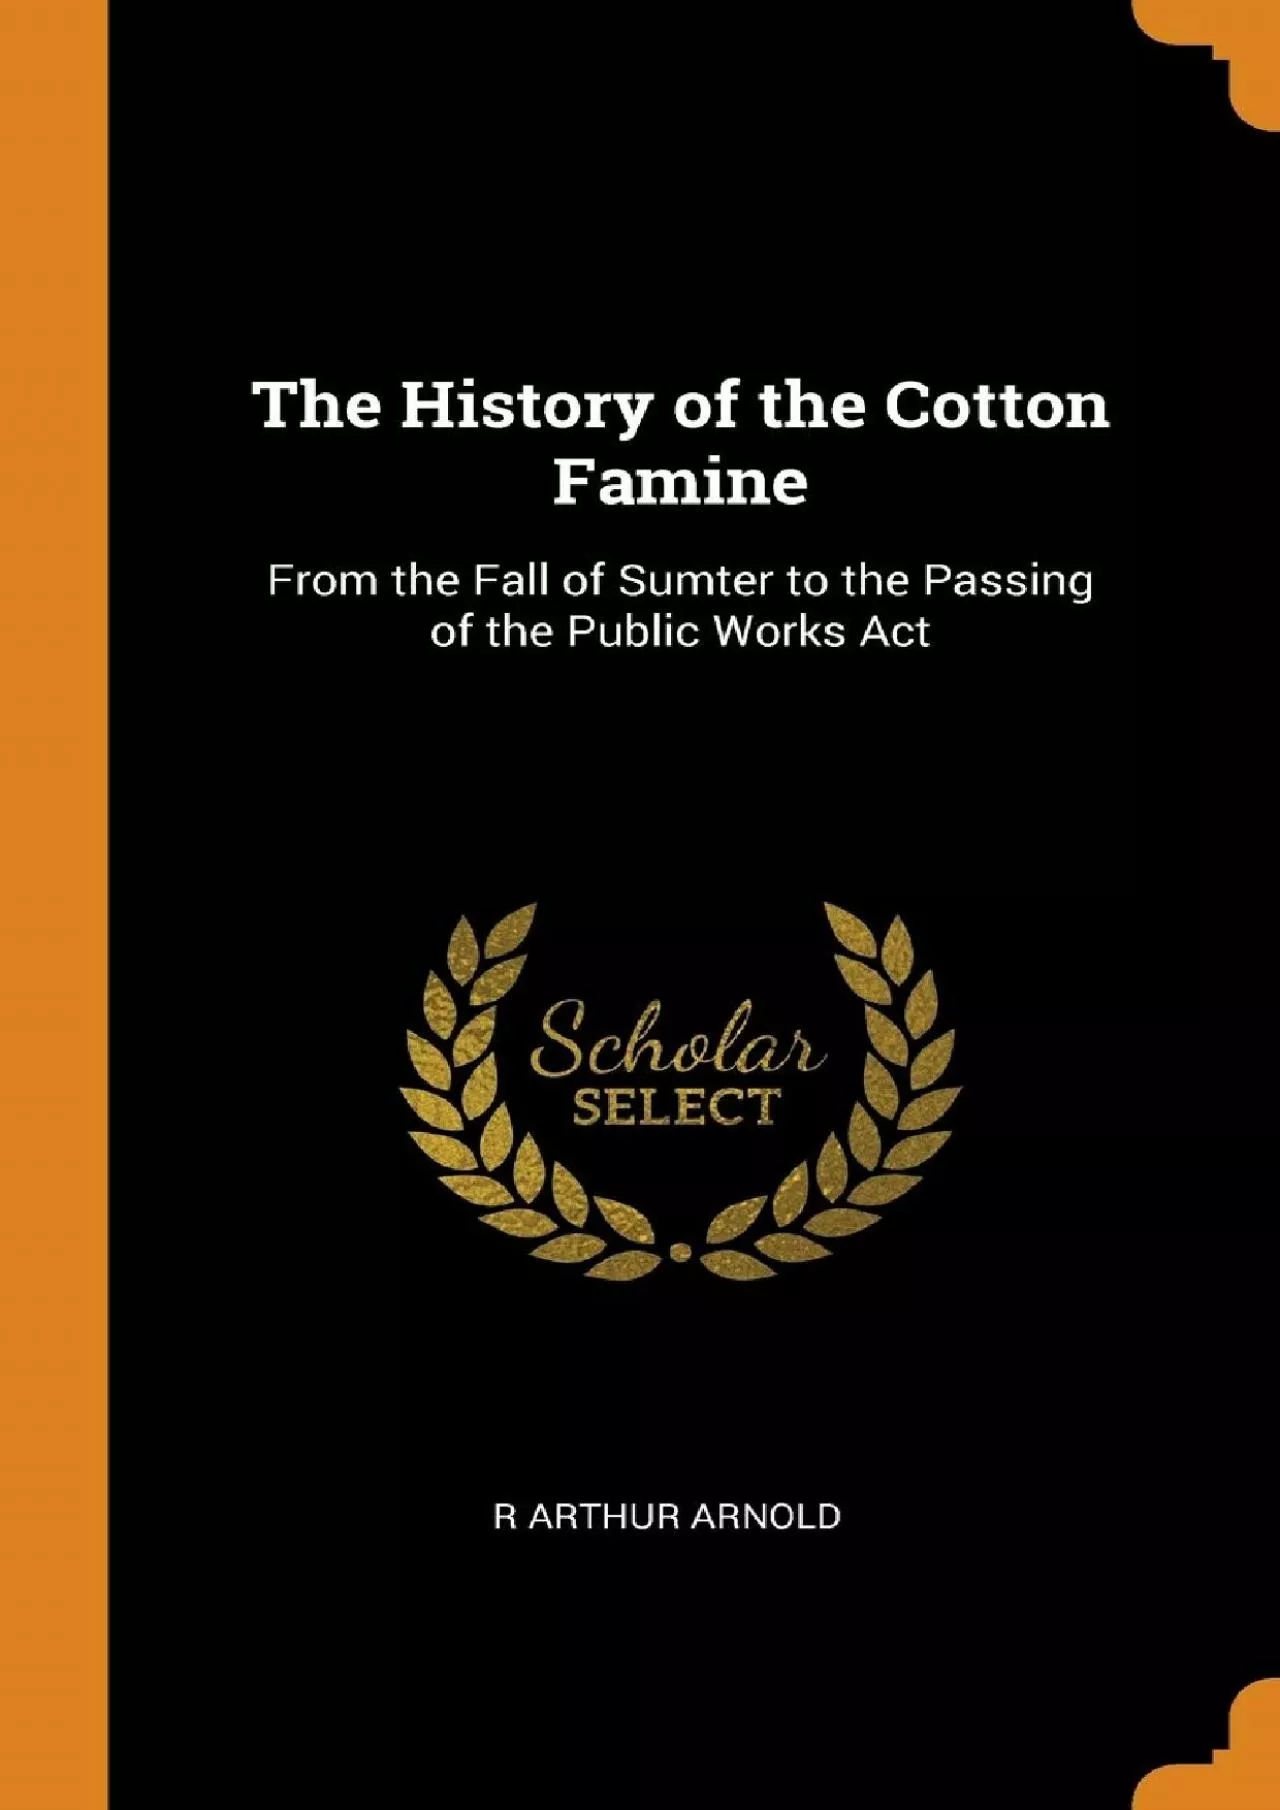 (EBOOK)-The History of the Cotton Famine: From the Fall of Sumter to the Passing of the